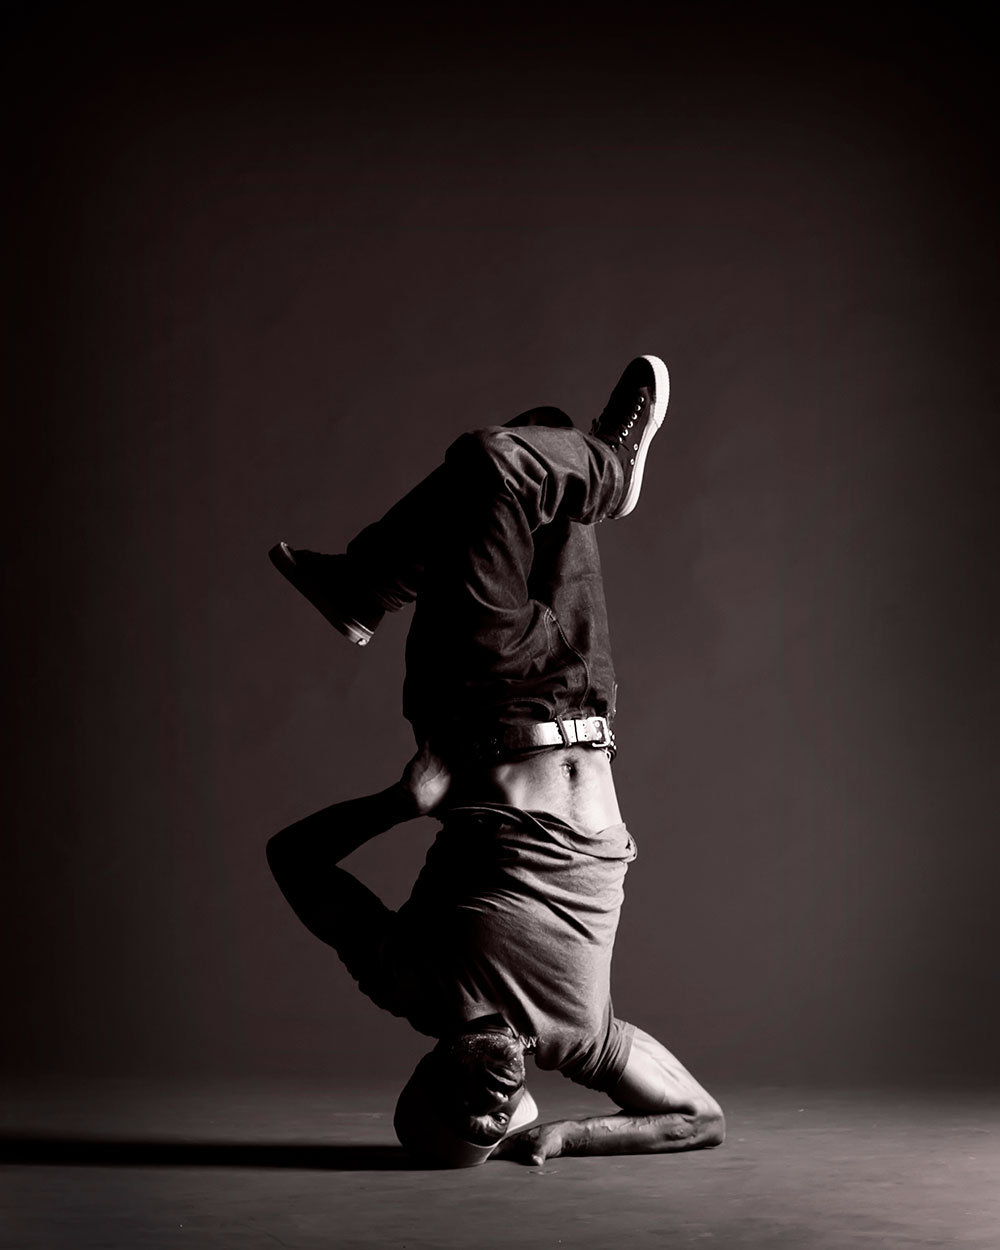 Black and white photo of man dancing upside down